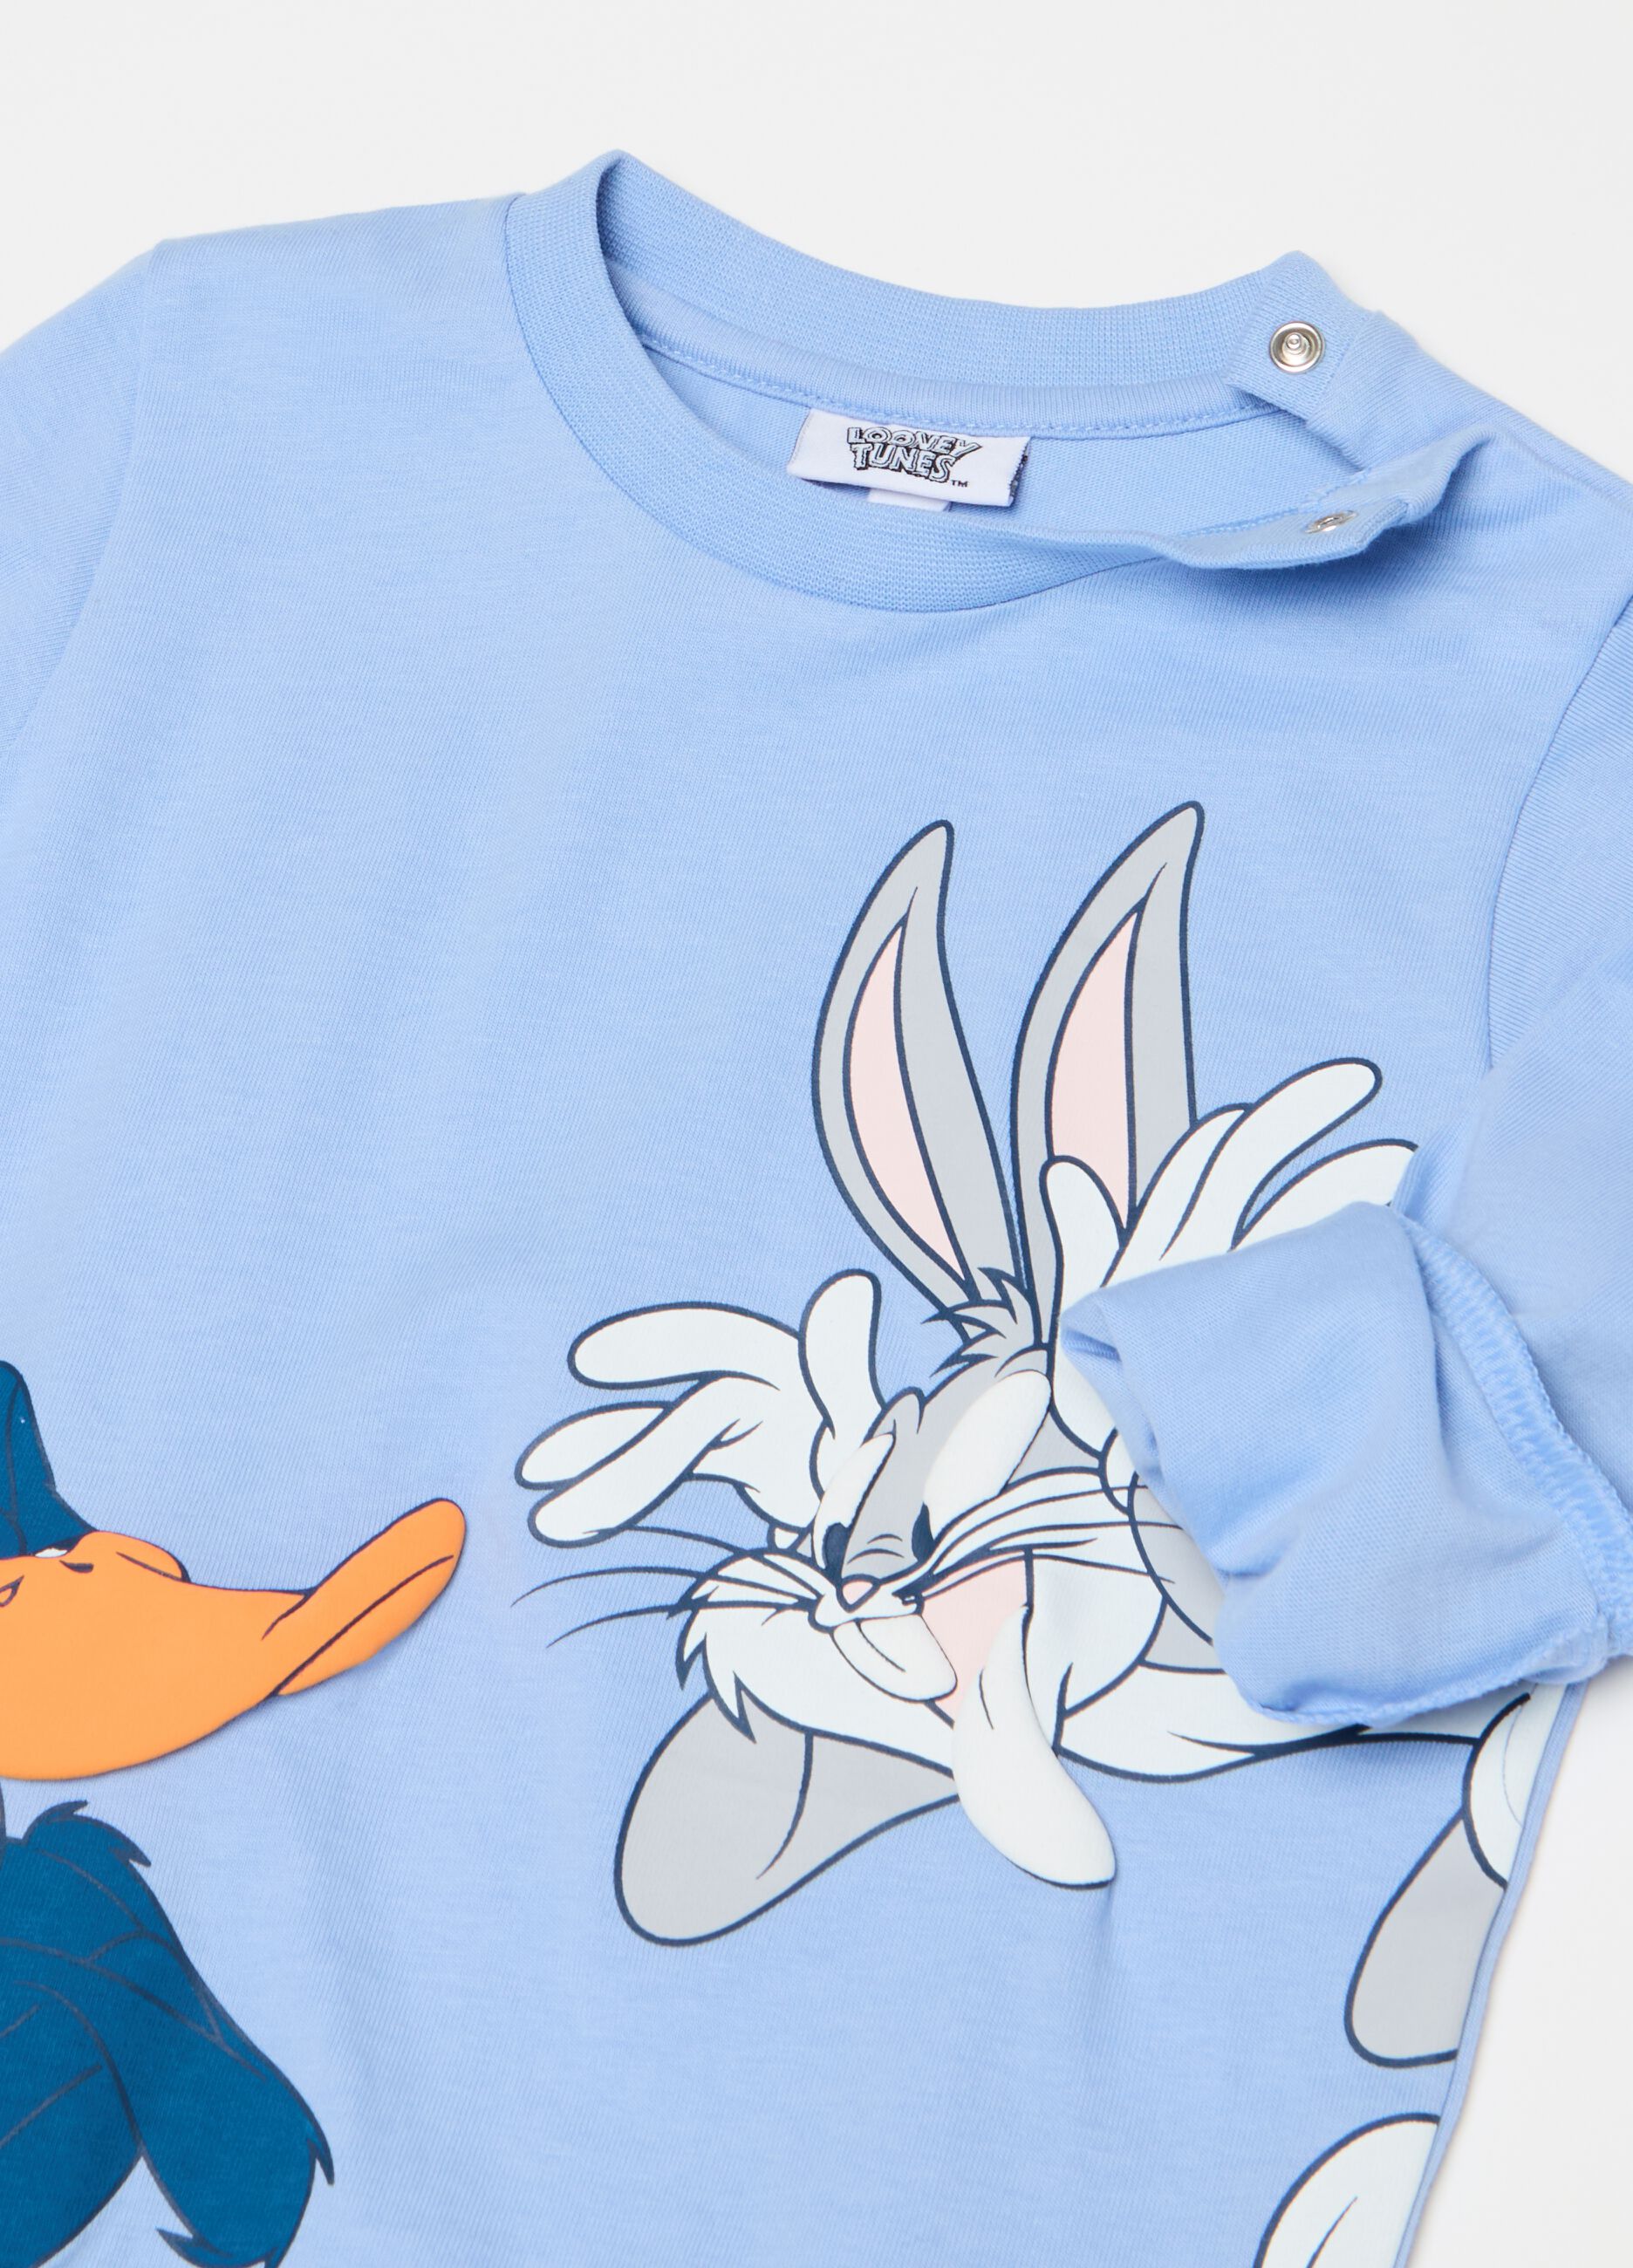 Bugs Bunny and Daffy Duck pyjamas in cotton